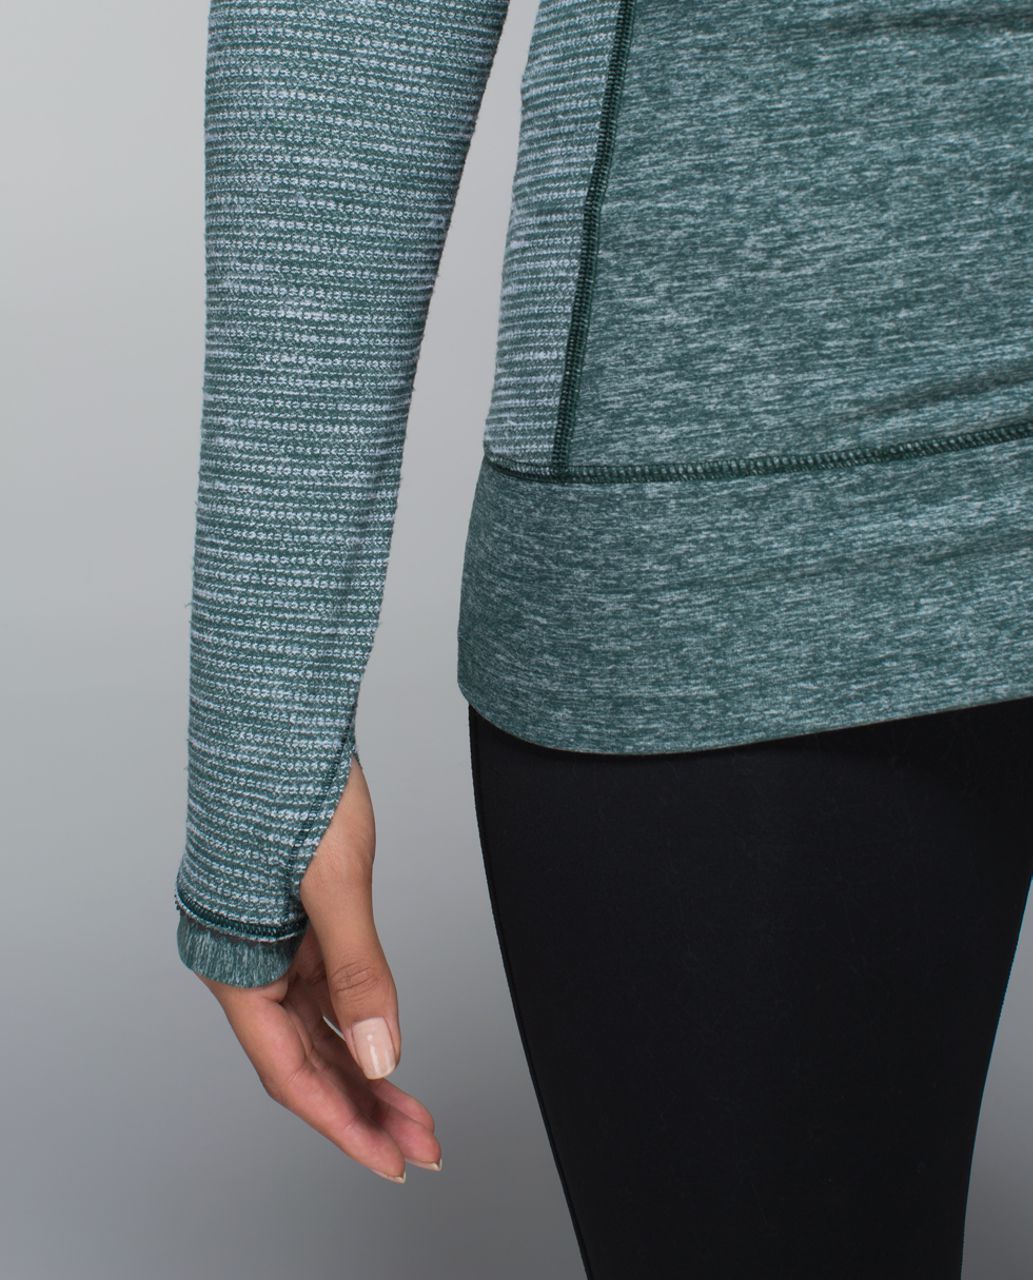 Lululemon Race Your Pace Long Sleeve - Heathered Fuel Green / Coco Pique Fuel Green